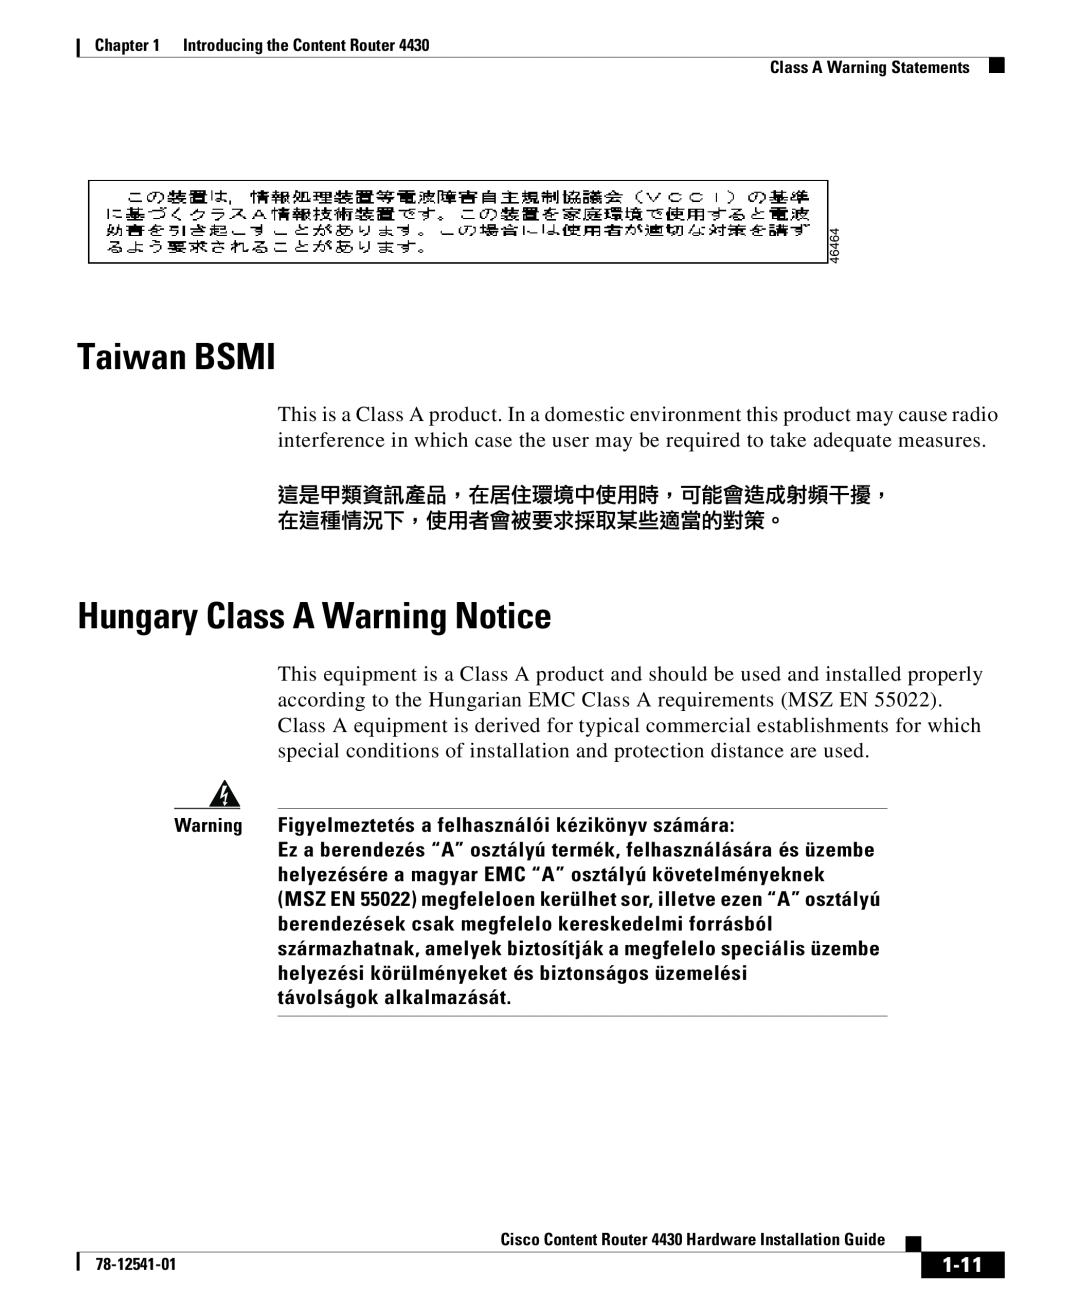 Cisco Systems 4430 specifications Taiwan BSMI, Hungary Class A Warning Notice, 1-11 